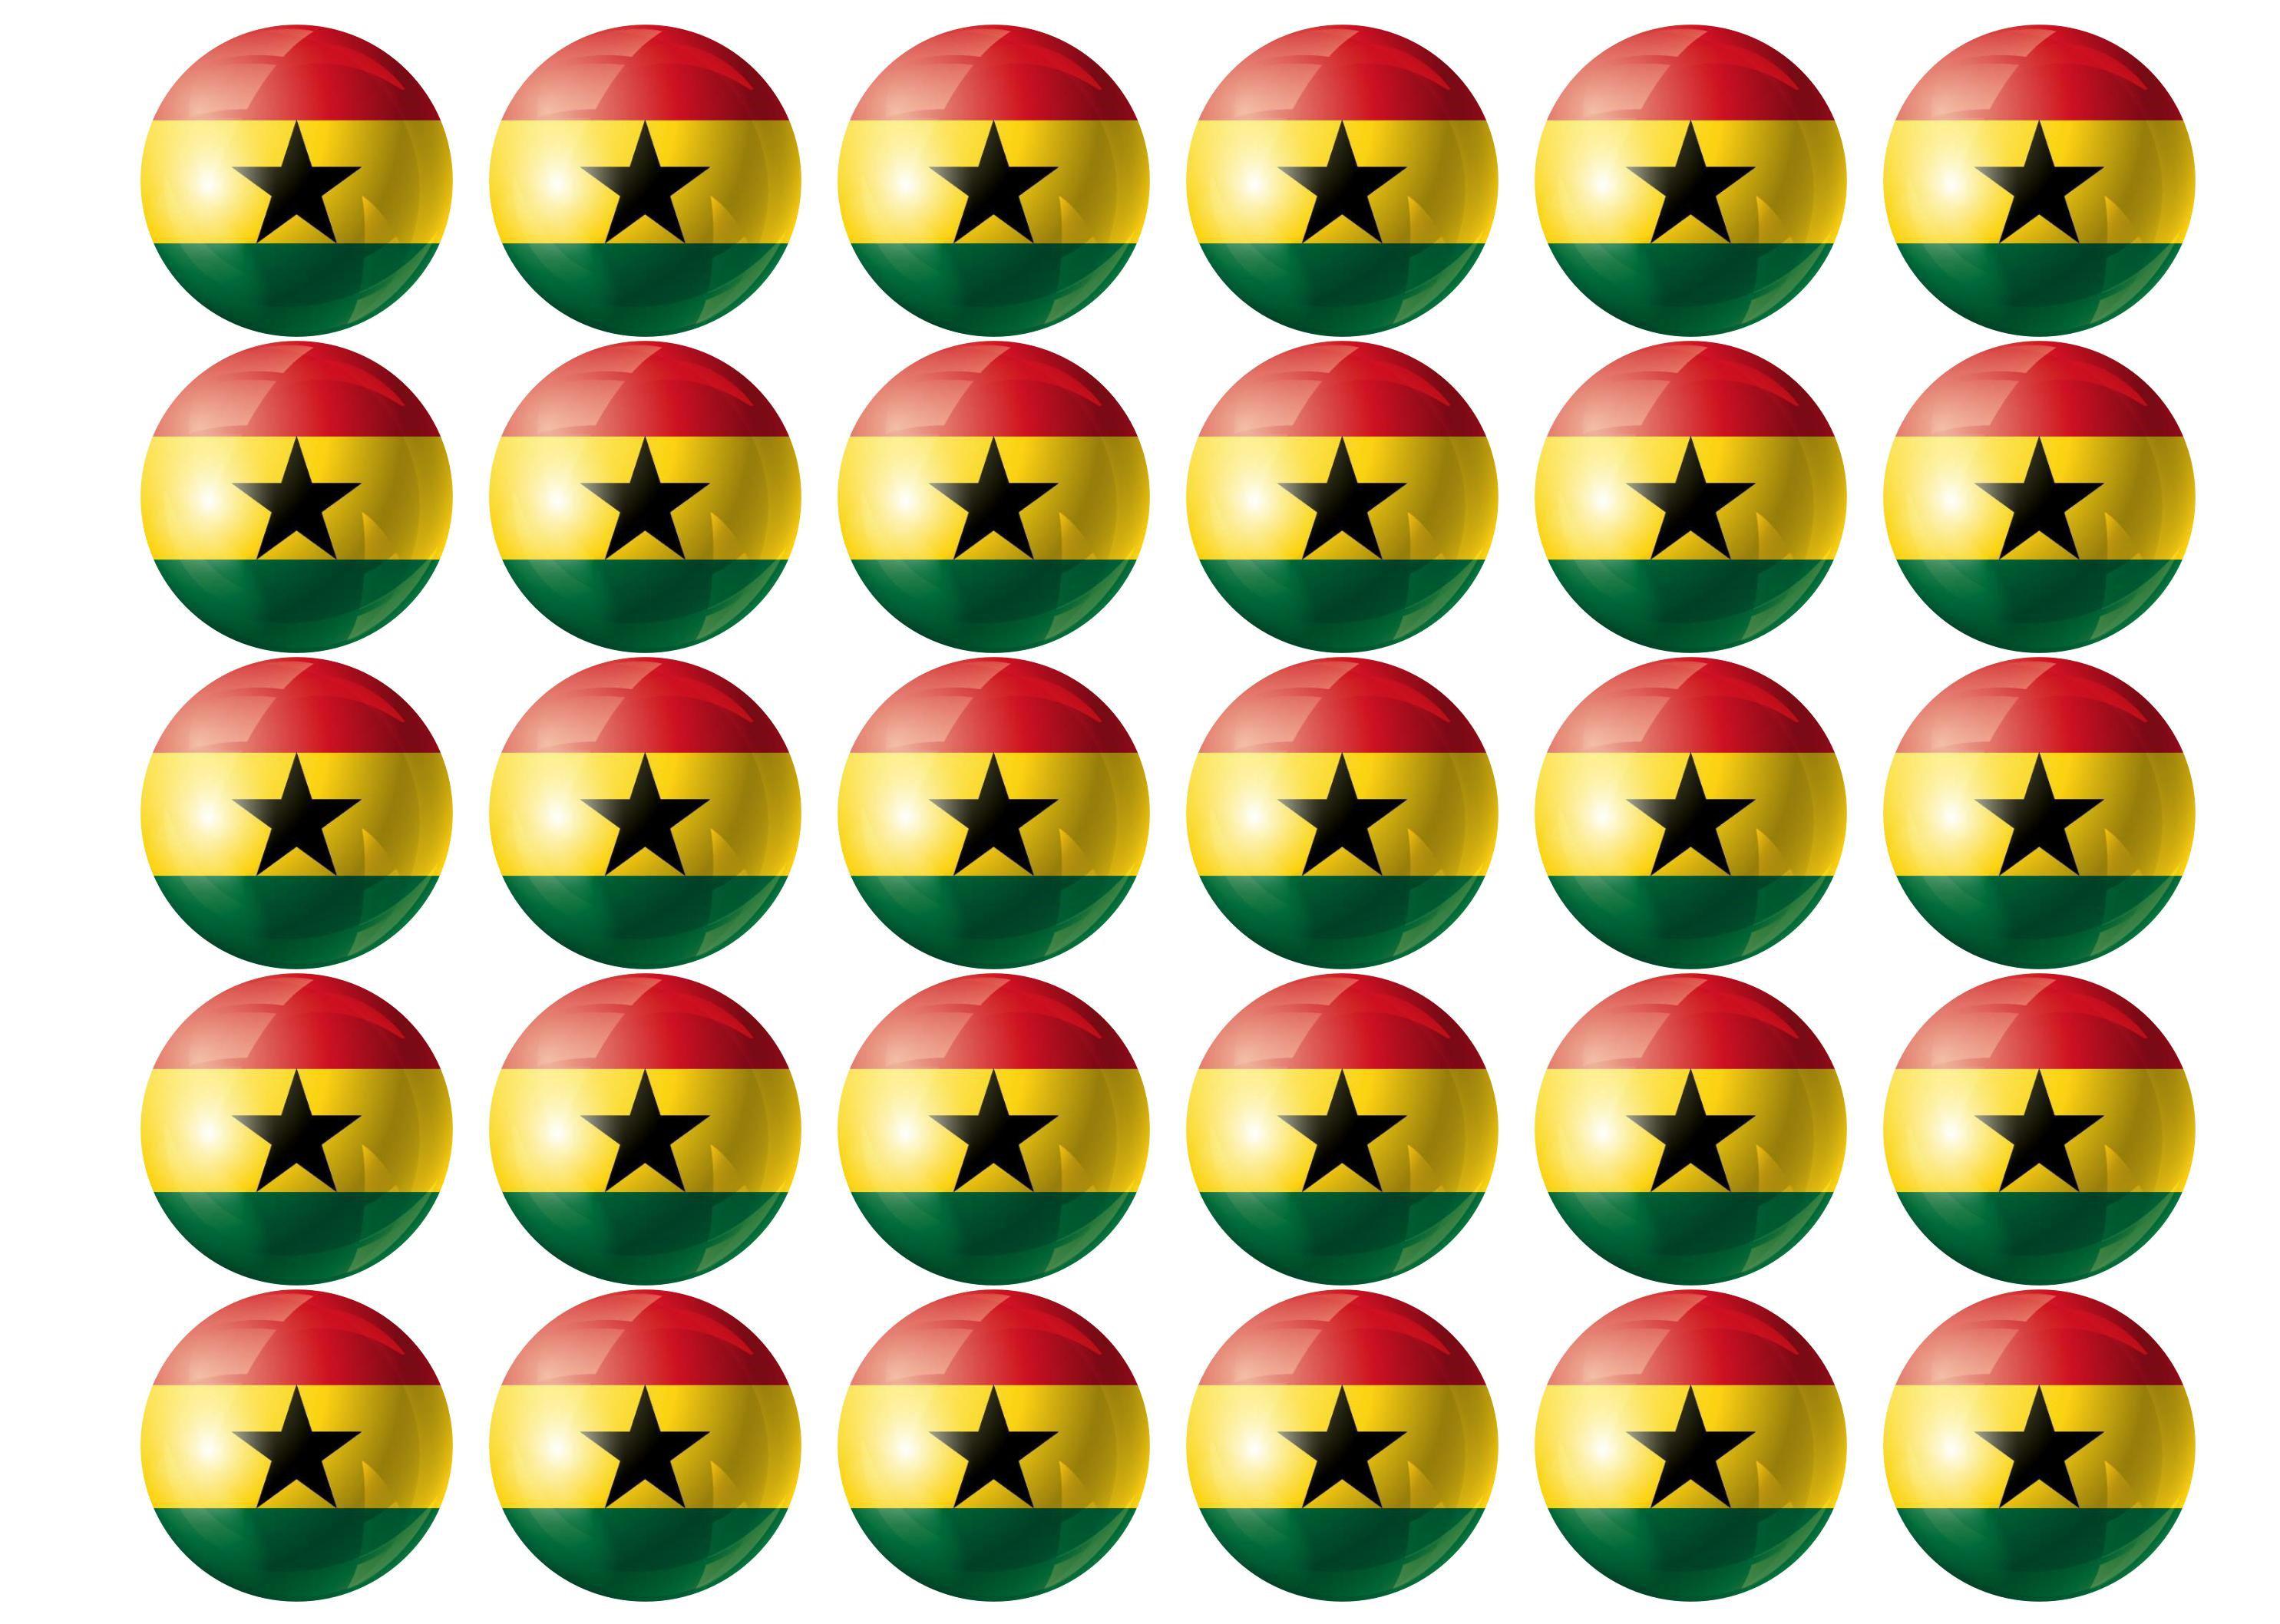 30 Edible cupcake toppers with the flag of Ghana